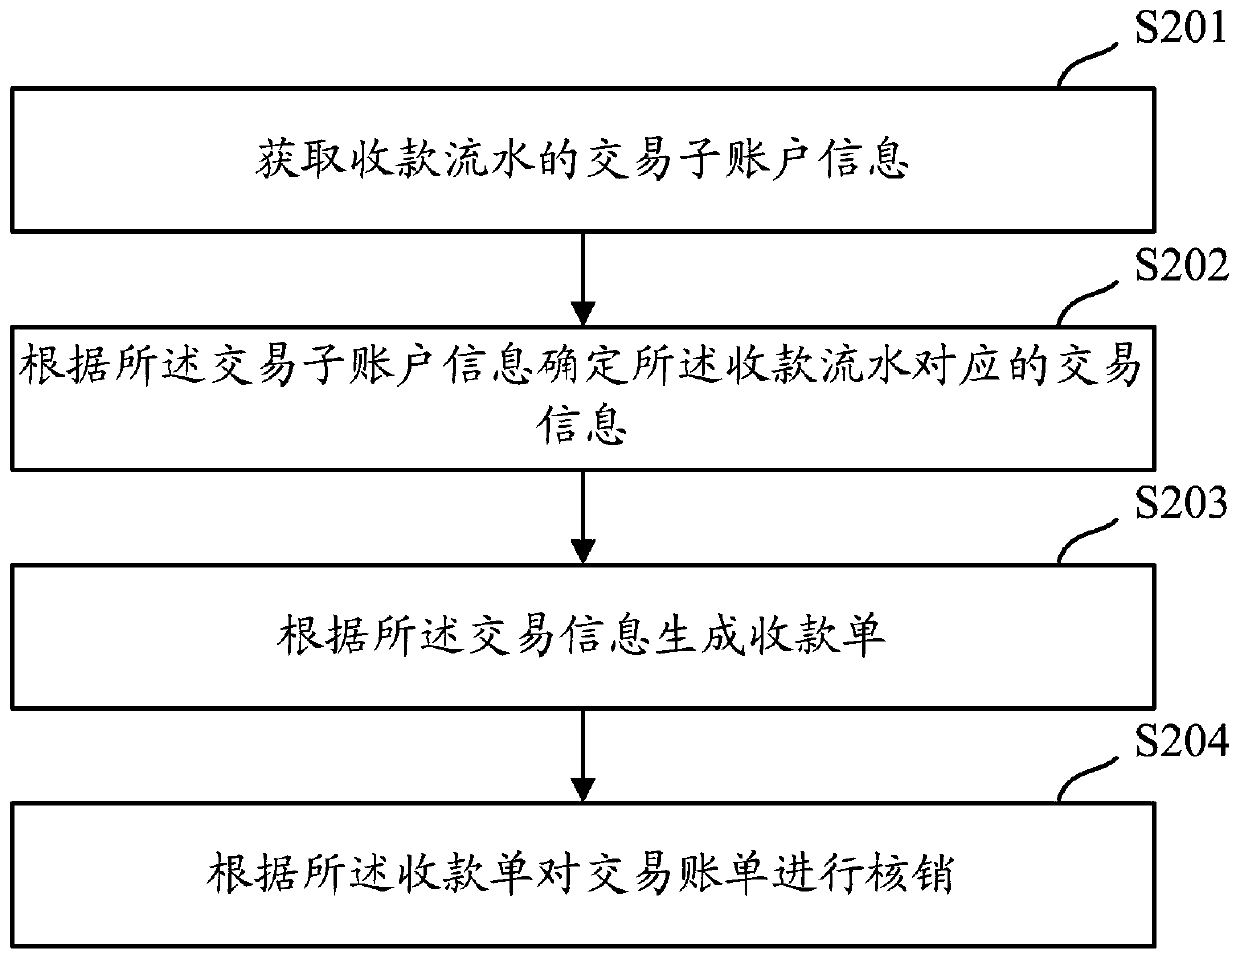 Transaction bill generation and verification methodbill generation and verification/reimbursement method, apparatus and device